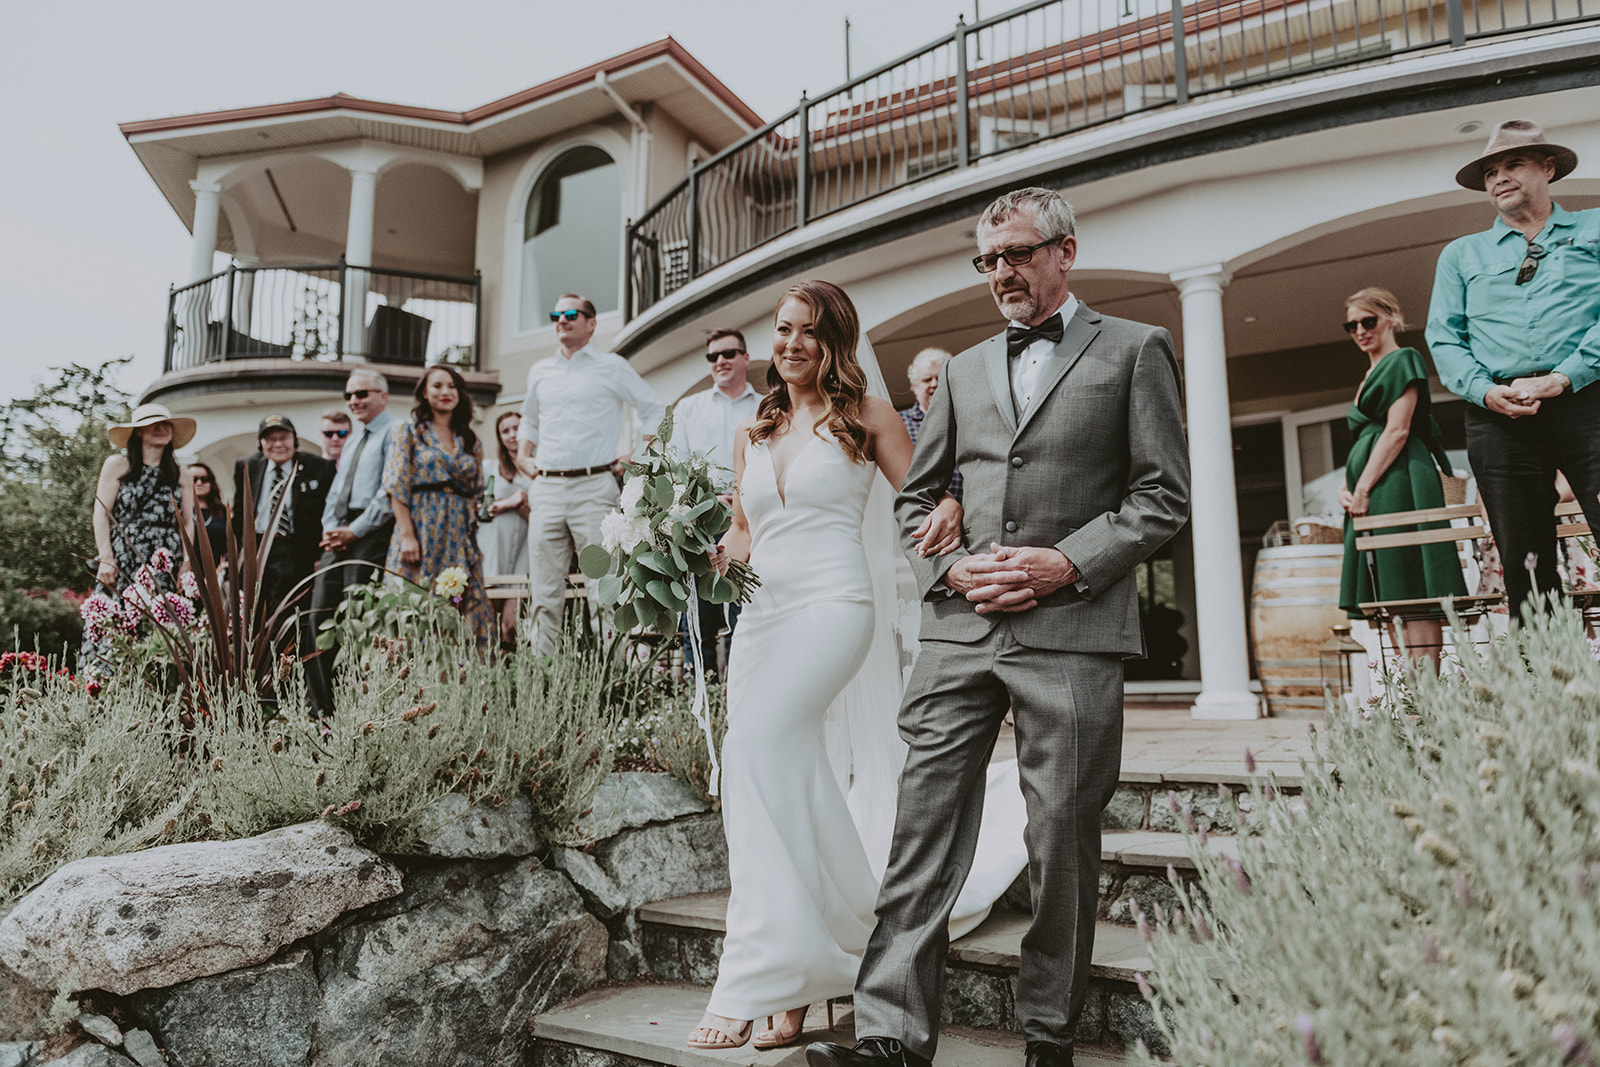 Vancouver Island wedding photography at Villa Eyrie Resort